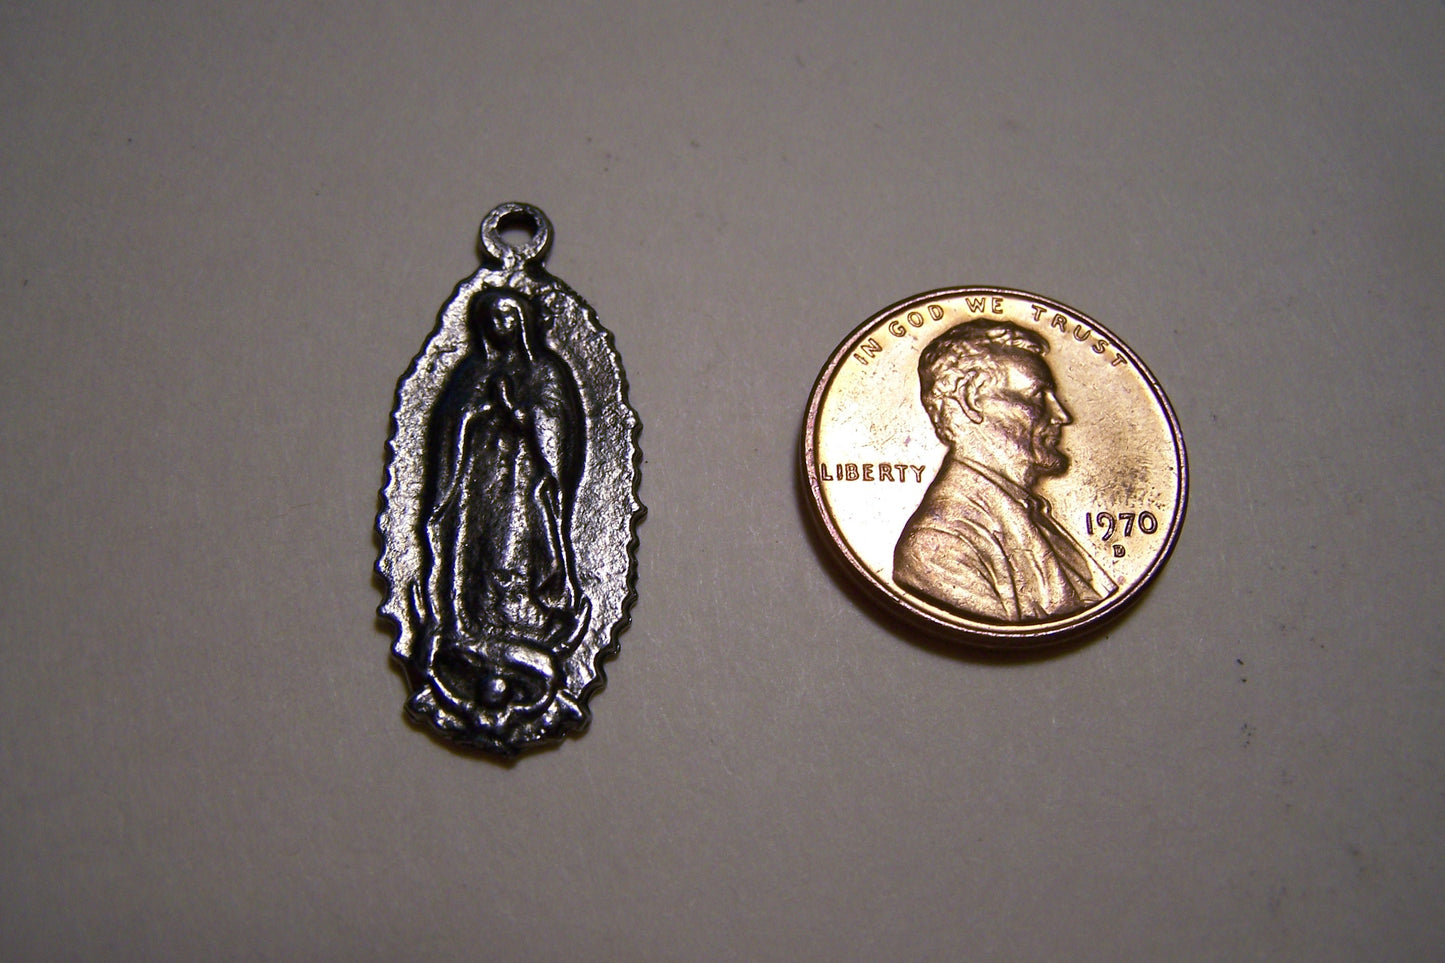 Milagro Lot - Lot of 25 Virgin of Guadalupe Milagros - Dark Gray Finish - Mexico